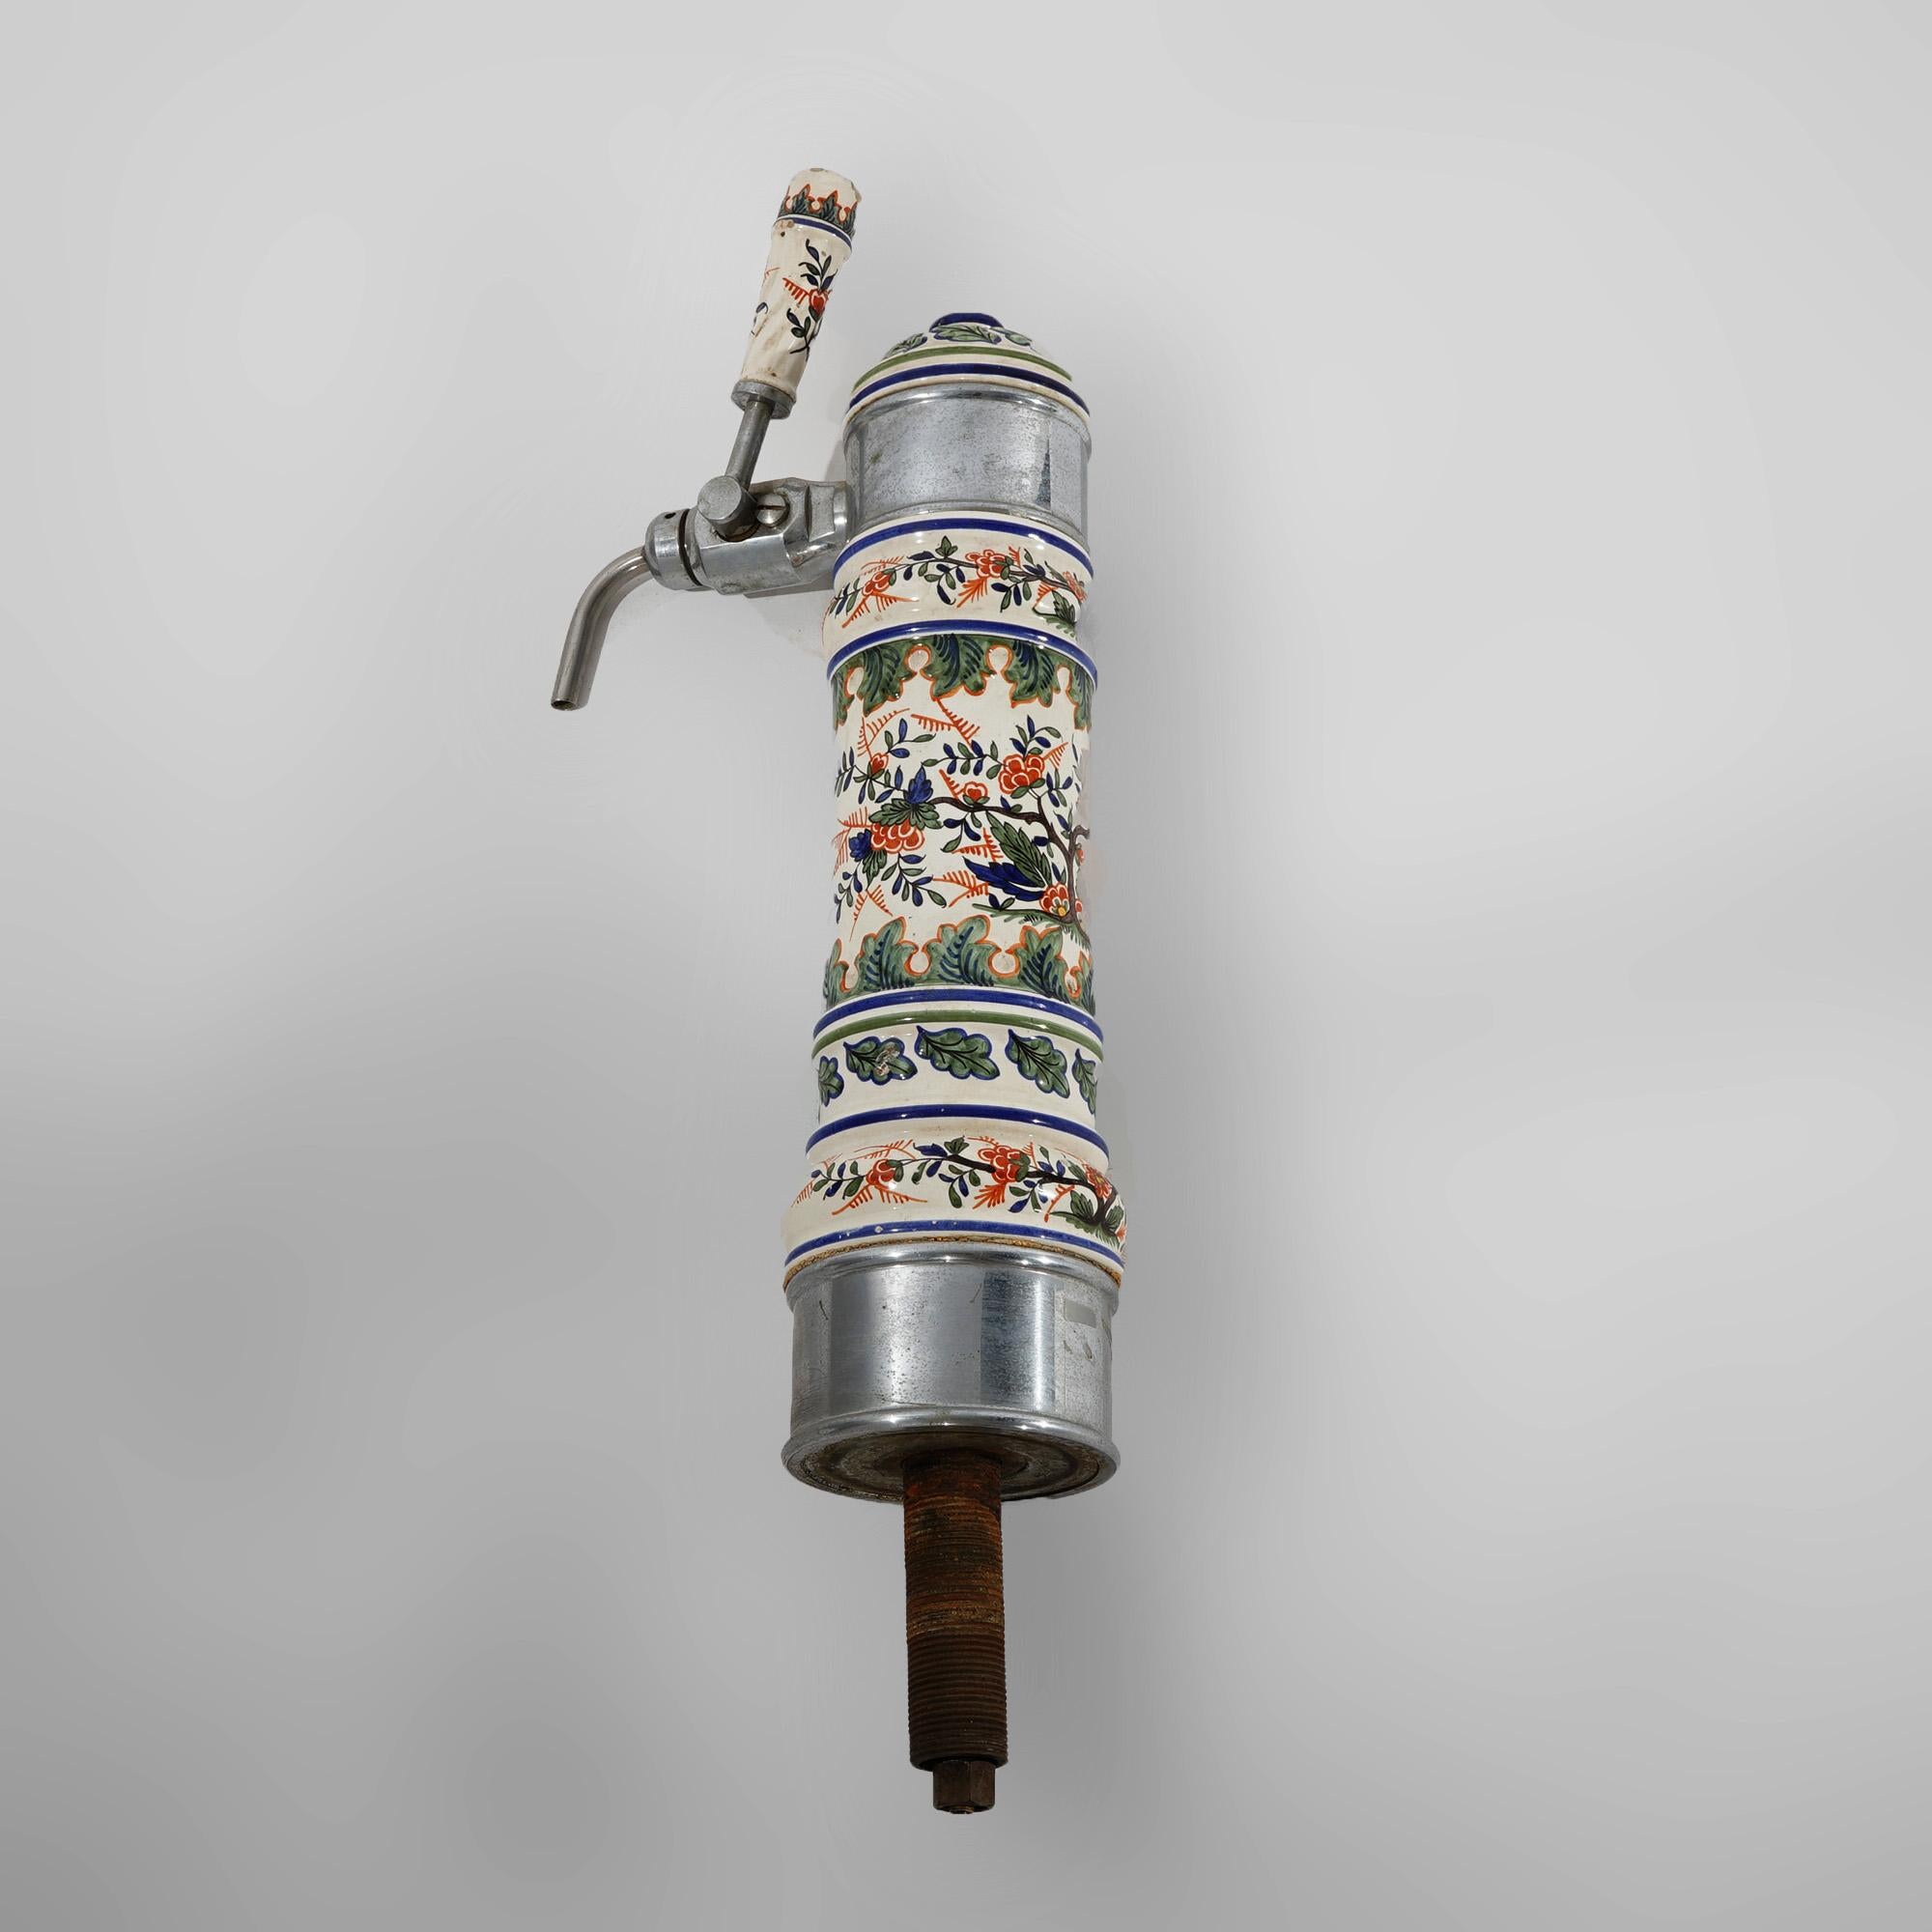 Antique German Chrome & Polychromed Foliate & Floral Hand Painted Pottery Beer Keg Tap C1920

Measures- 24''H x 8.5''W x 4.75''D